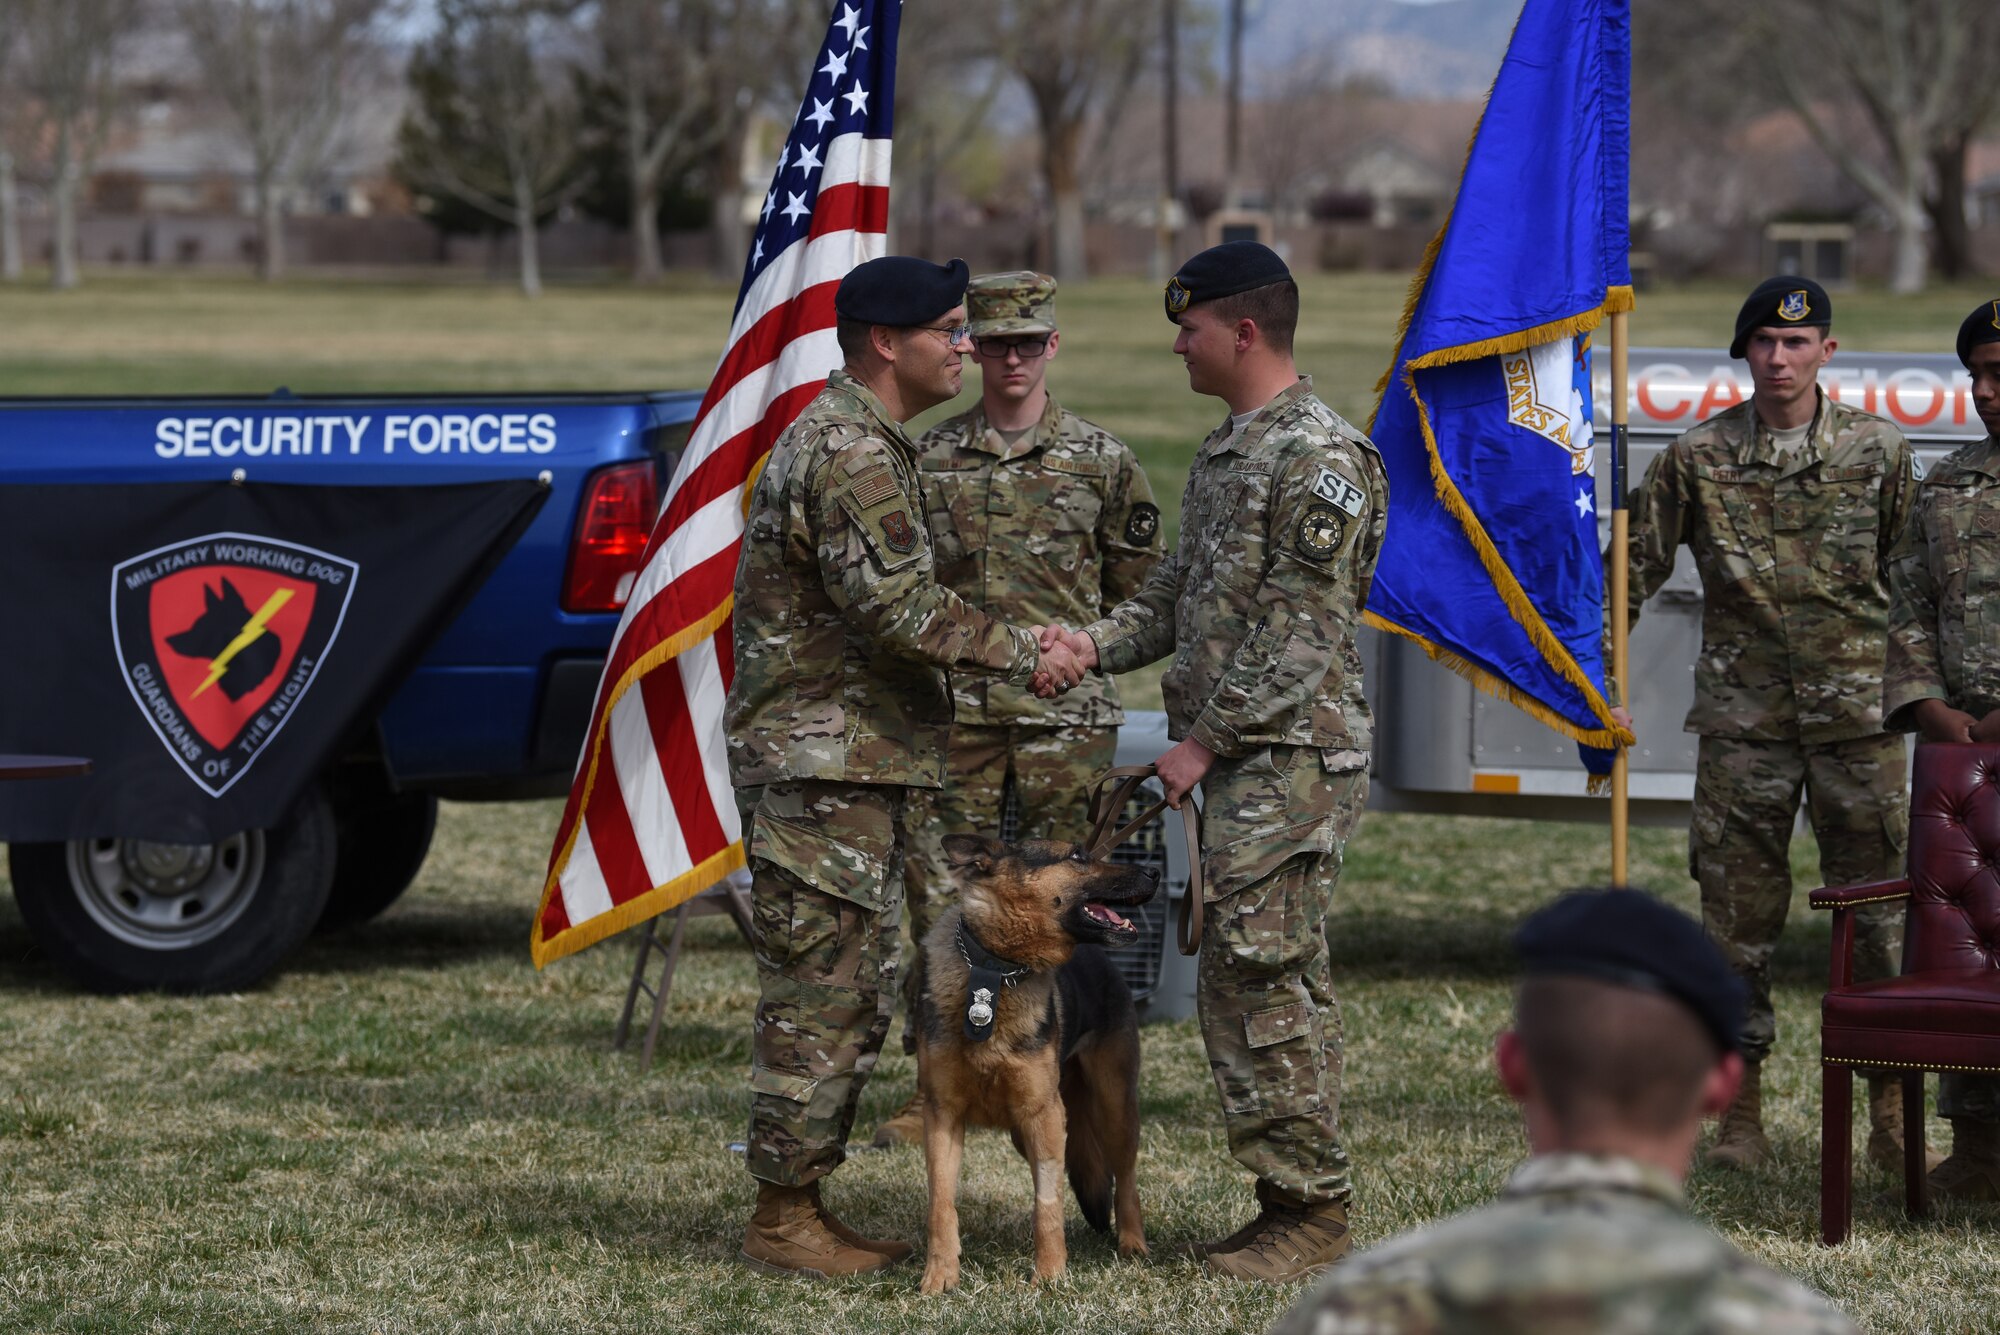 U.S. Air Force Col. Theodore Breuker, 377th Security Forces Group commander, hands over responsibility of Military Working Dog Boris to Staff Sgt. Austin Clark, 377th Security Forces Squadron military working dog handler and Boris’s adopter, at Kirtland Air Force Base N.M., March 26, 2019. Boris had 10 handlers during his career, and worked with Clark for two of his eight years in service. (U.S. Air Force photo by Senior Airman Eli Chevalier)